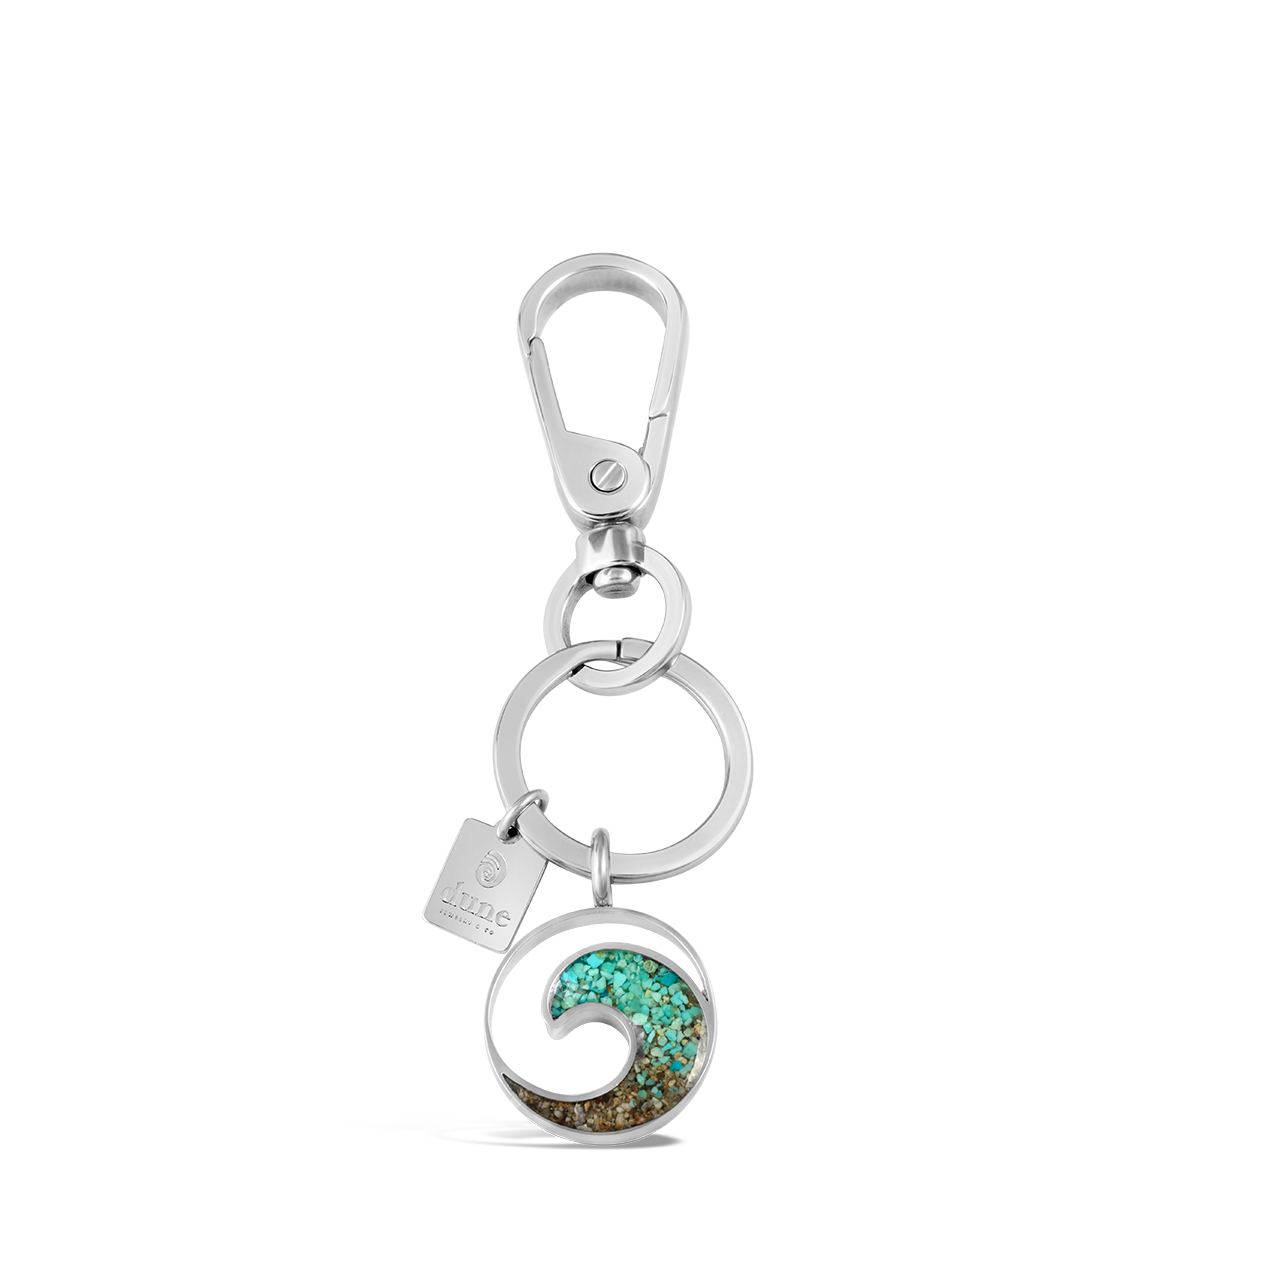 Keychain and Bag Charm - Wave - Turquoise Gradient